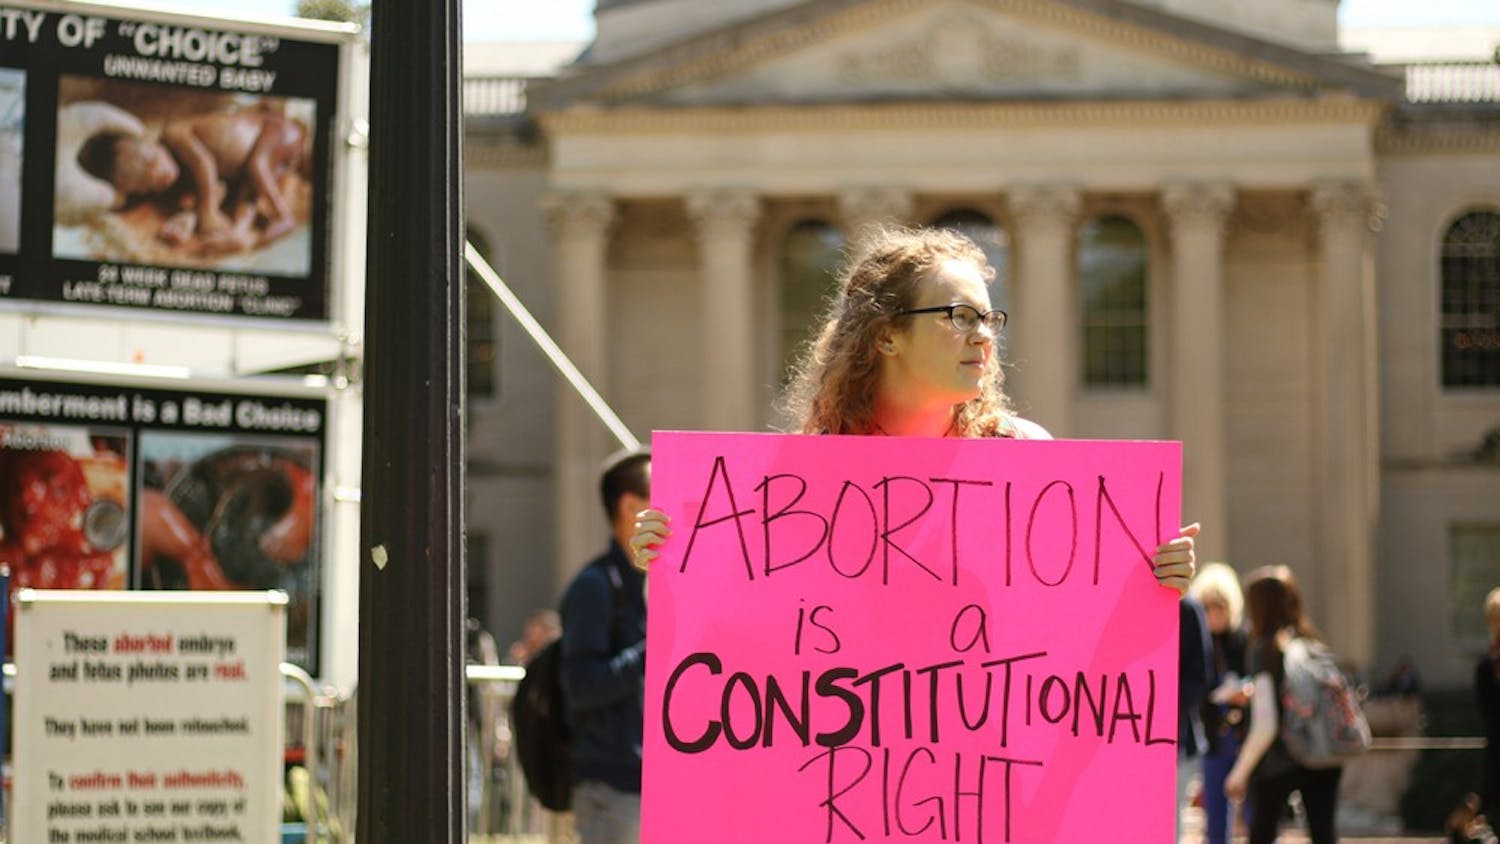 Senior geology major Michelle Gavel participates in the counter-protest against anti-abortion group the Genocide Awareness Project. Gavel was invited to protest the display by friends with shared views, and expresses disappointment in GAP's return to campus.